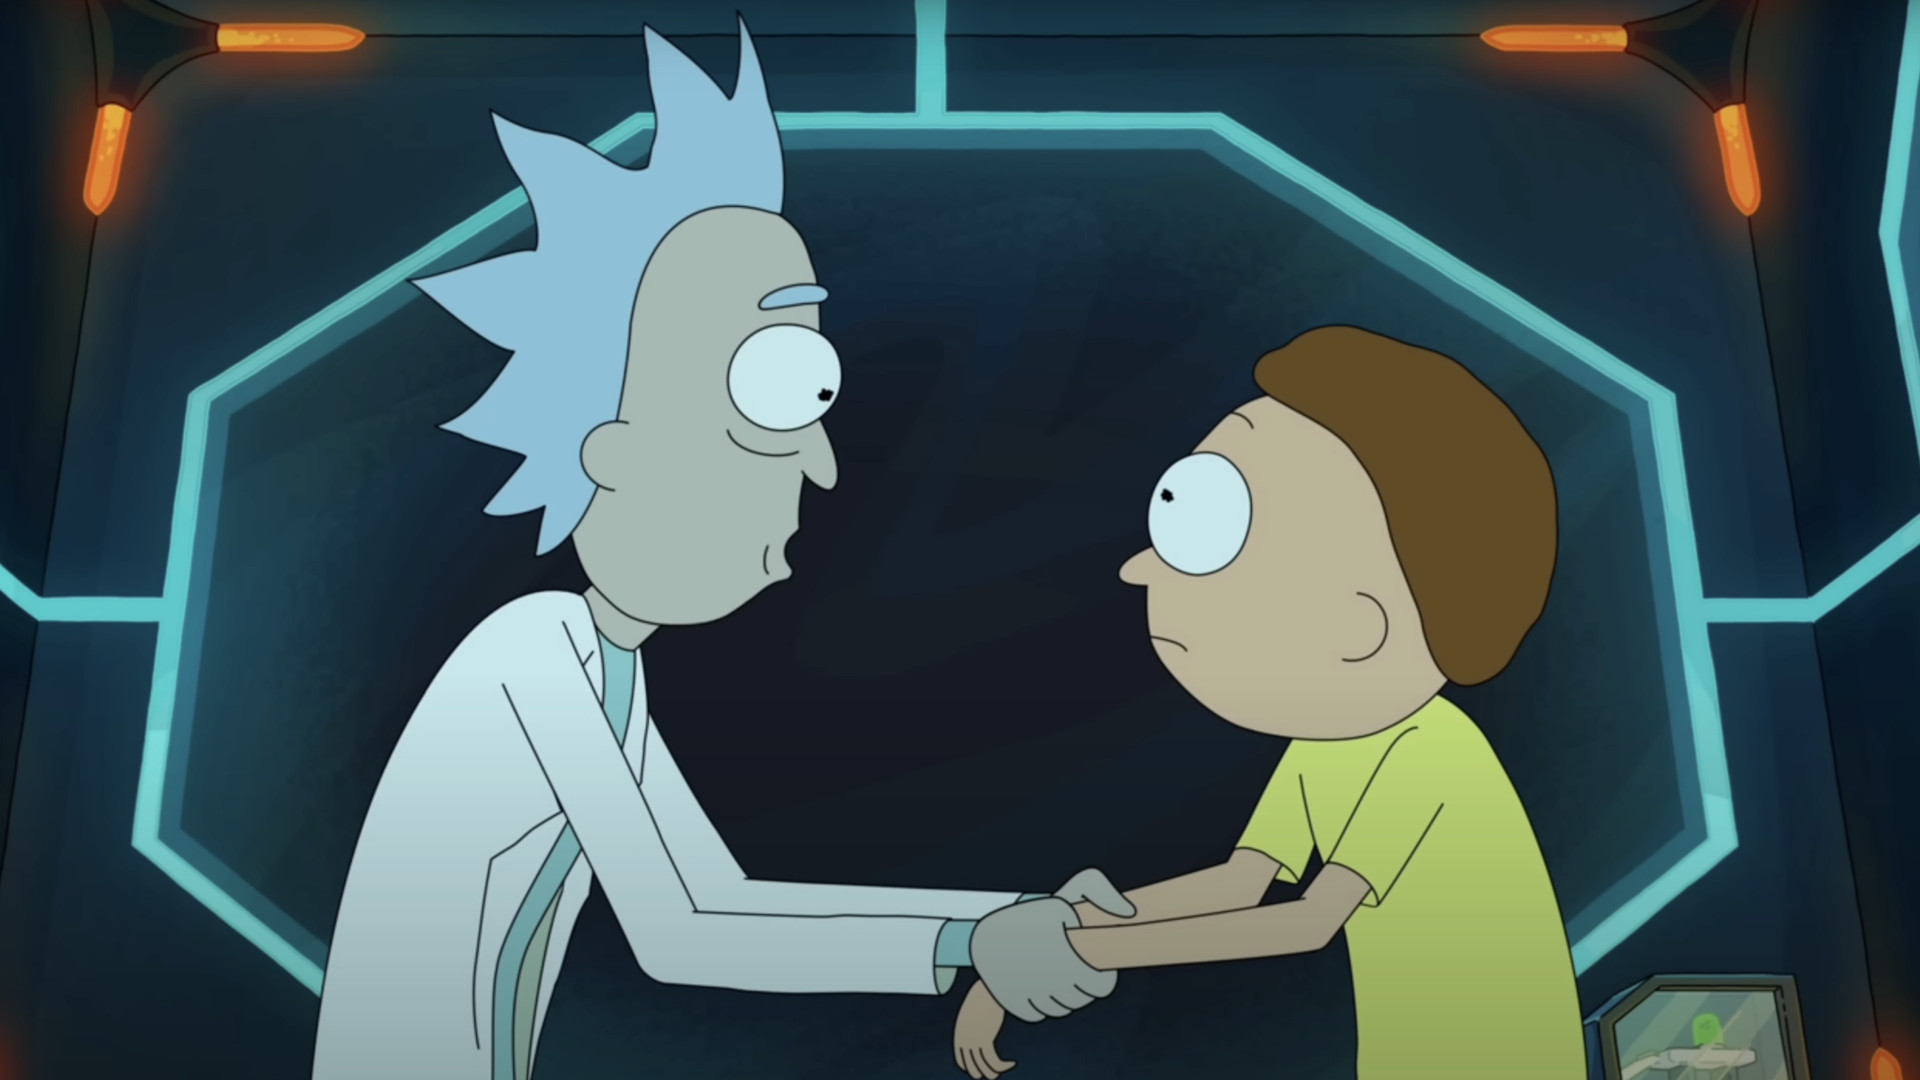 Rick and Morty season 6 looks set to land on HBO Max sooner than you'd